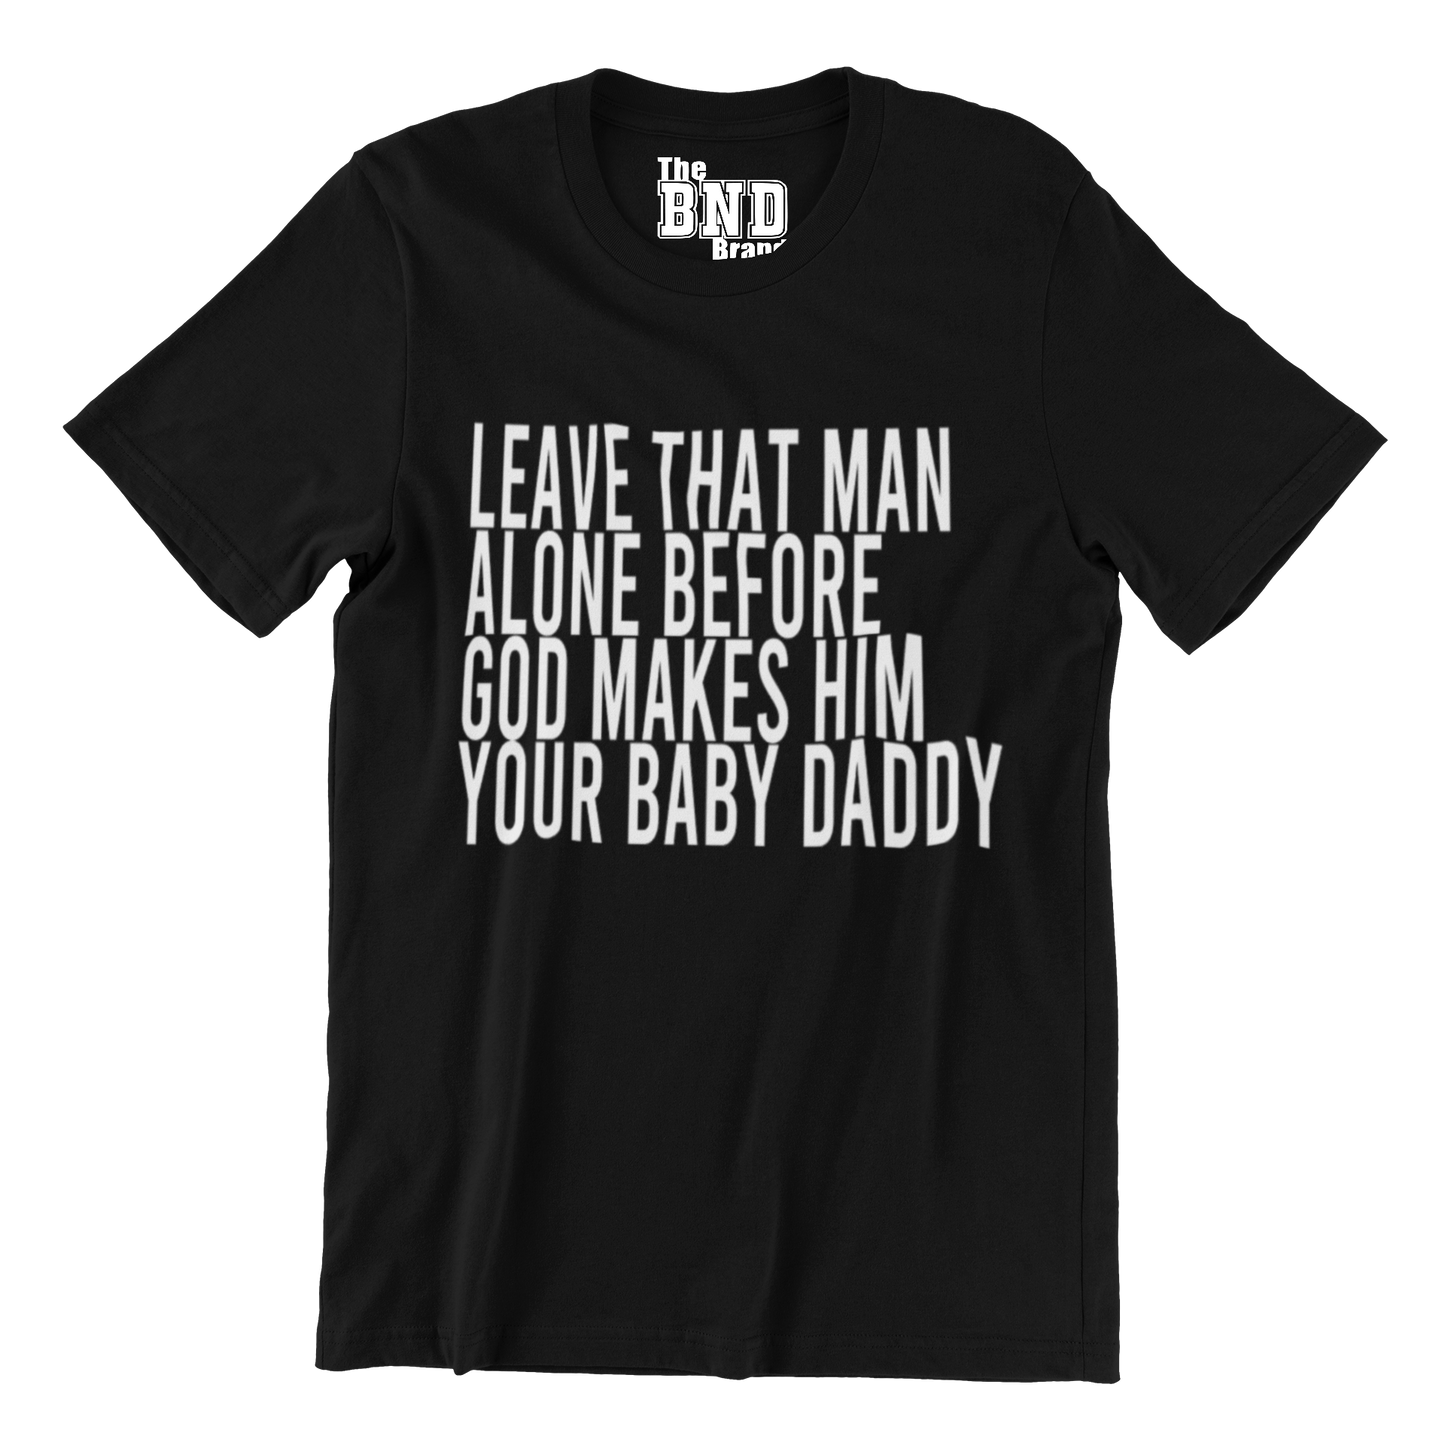 LEAVE THAT MAN ALONE BEFORE GOD MAKES HIM YOUR BABY DADDY TEE